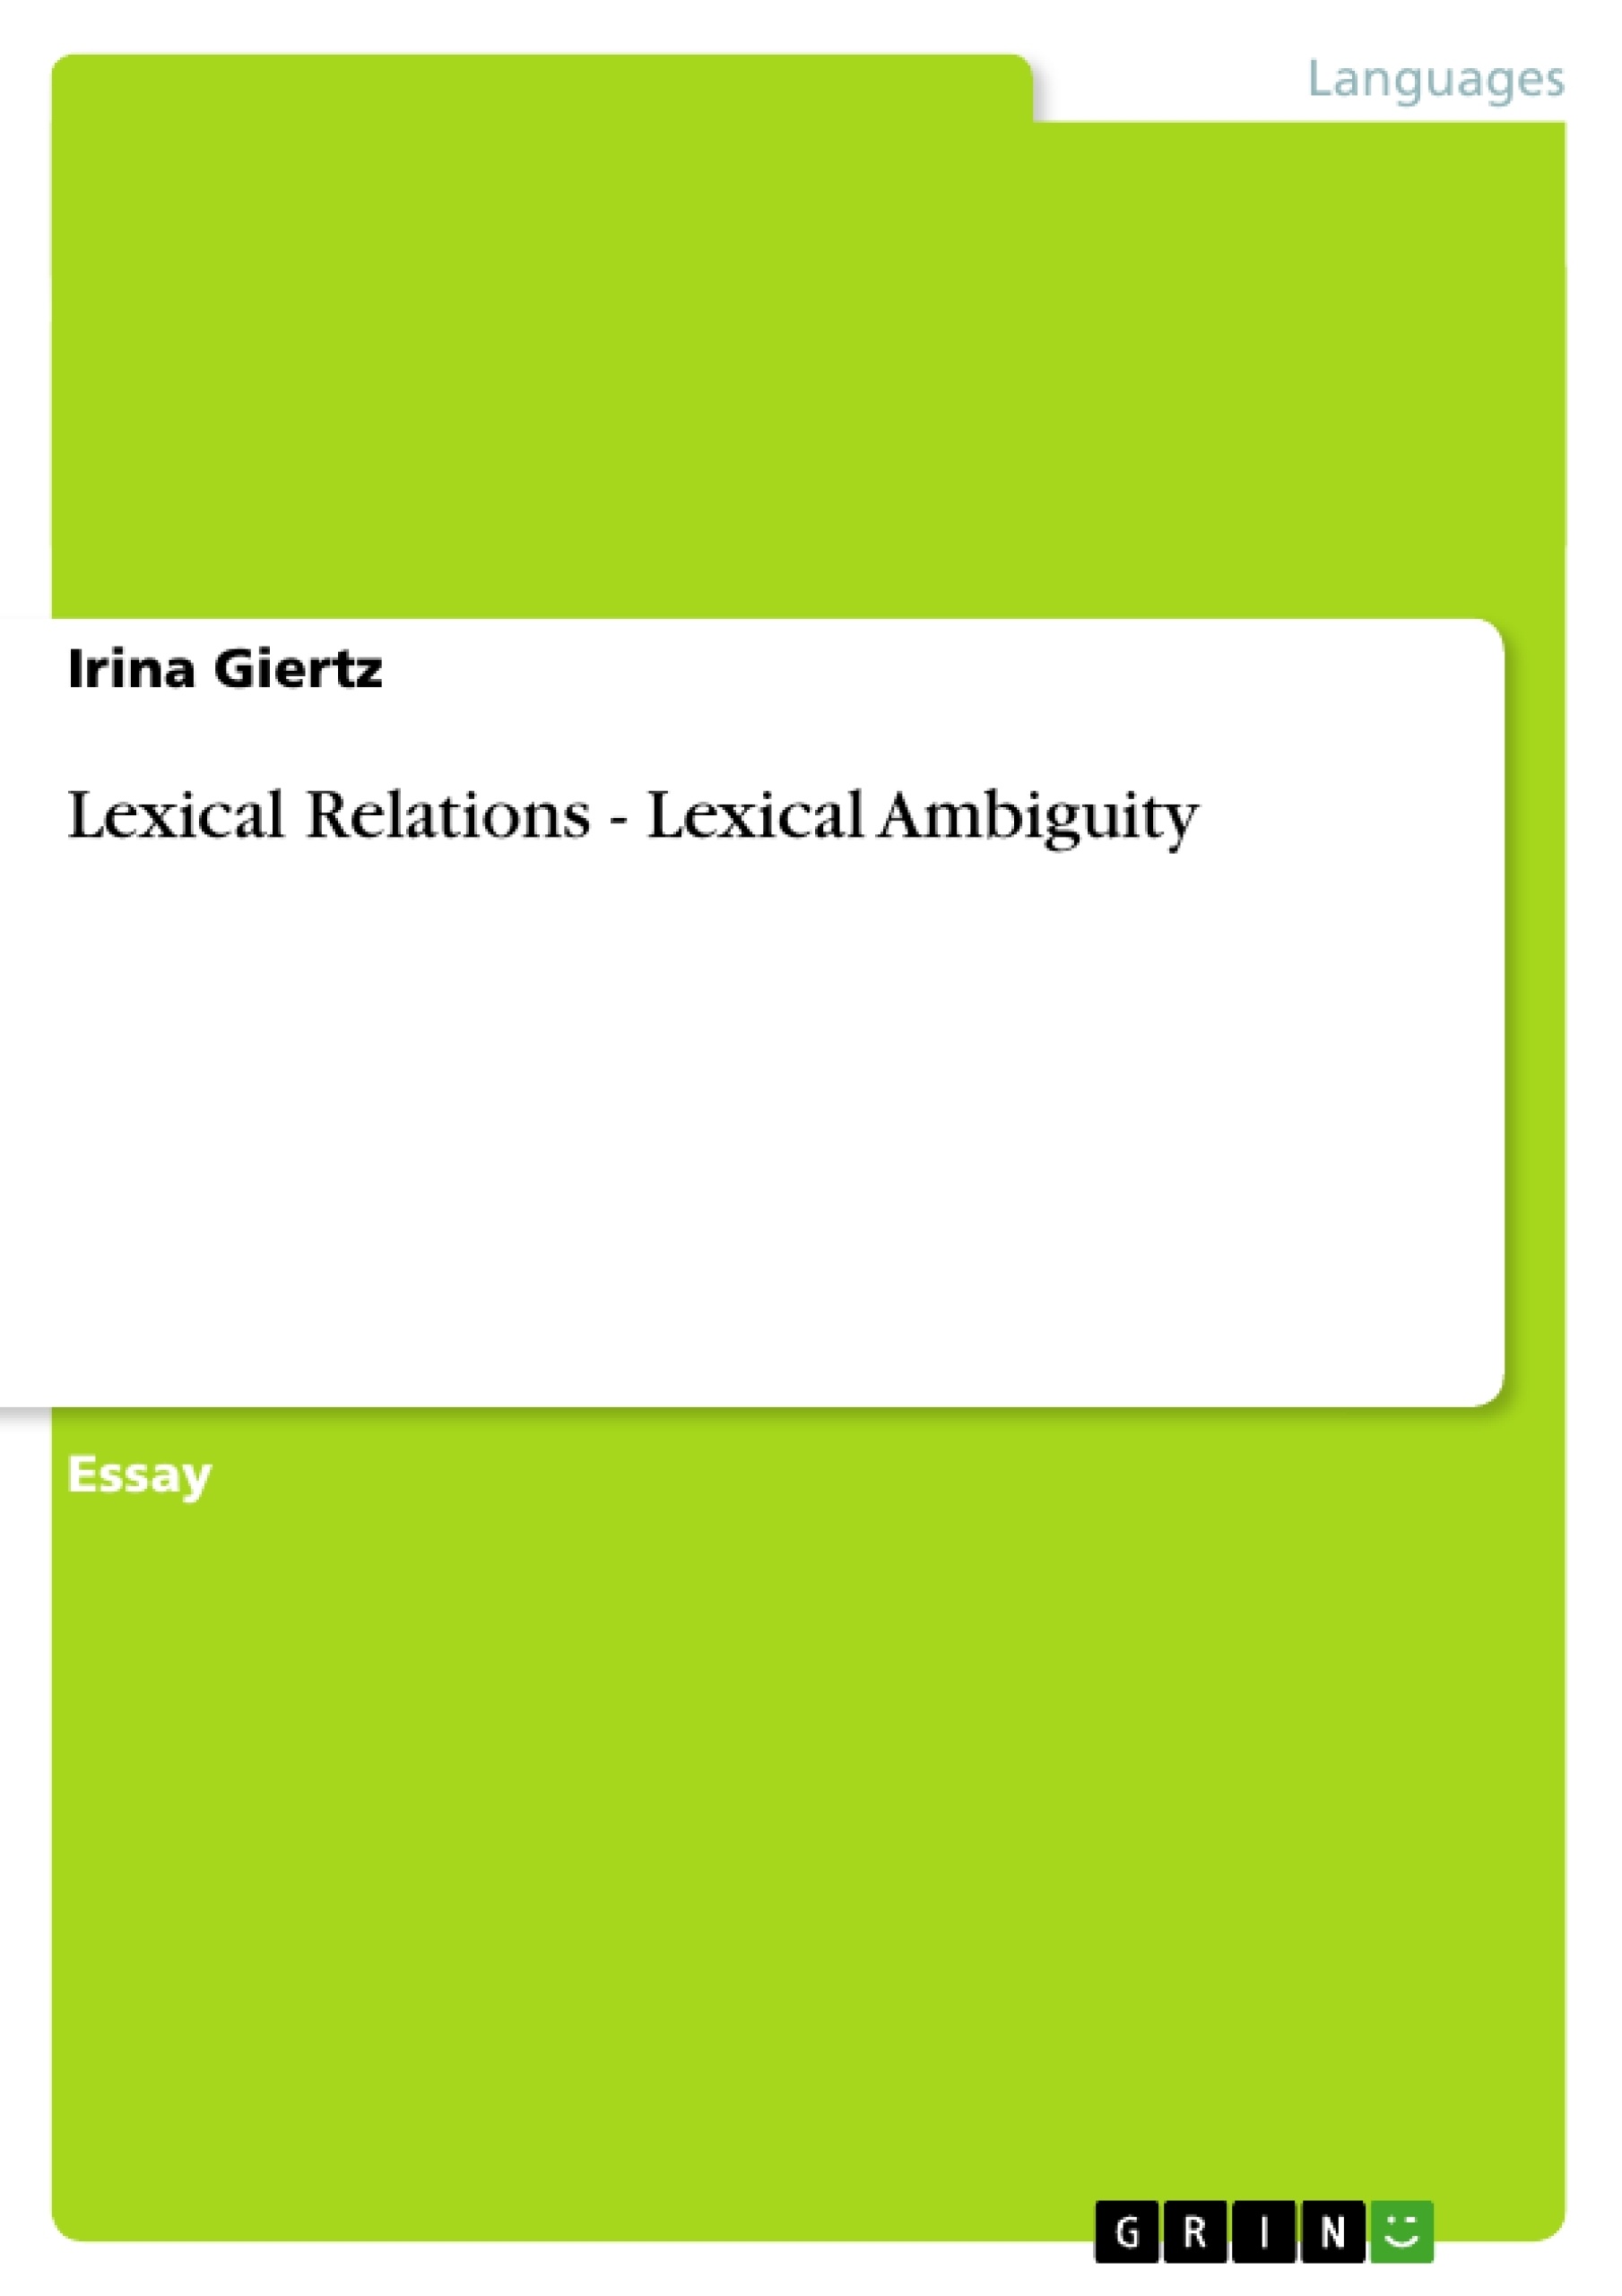 difference between lexical and structural ambiguity